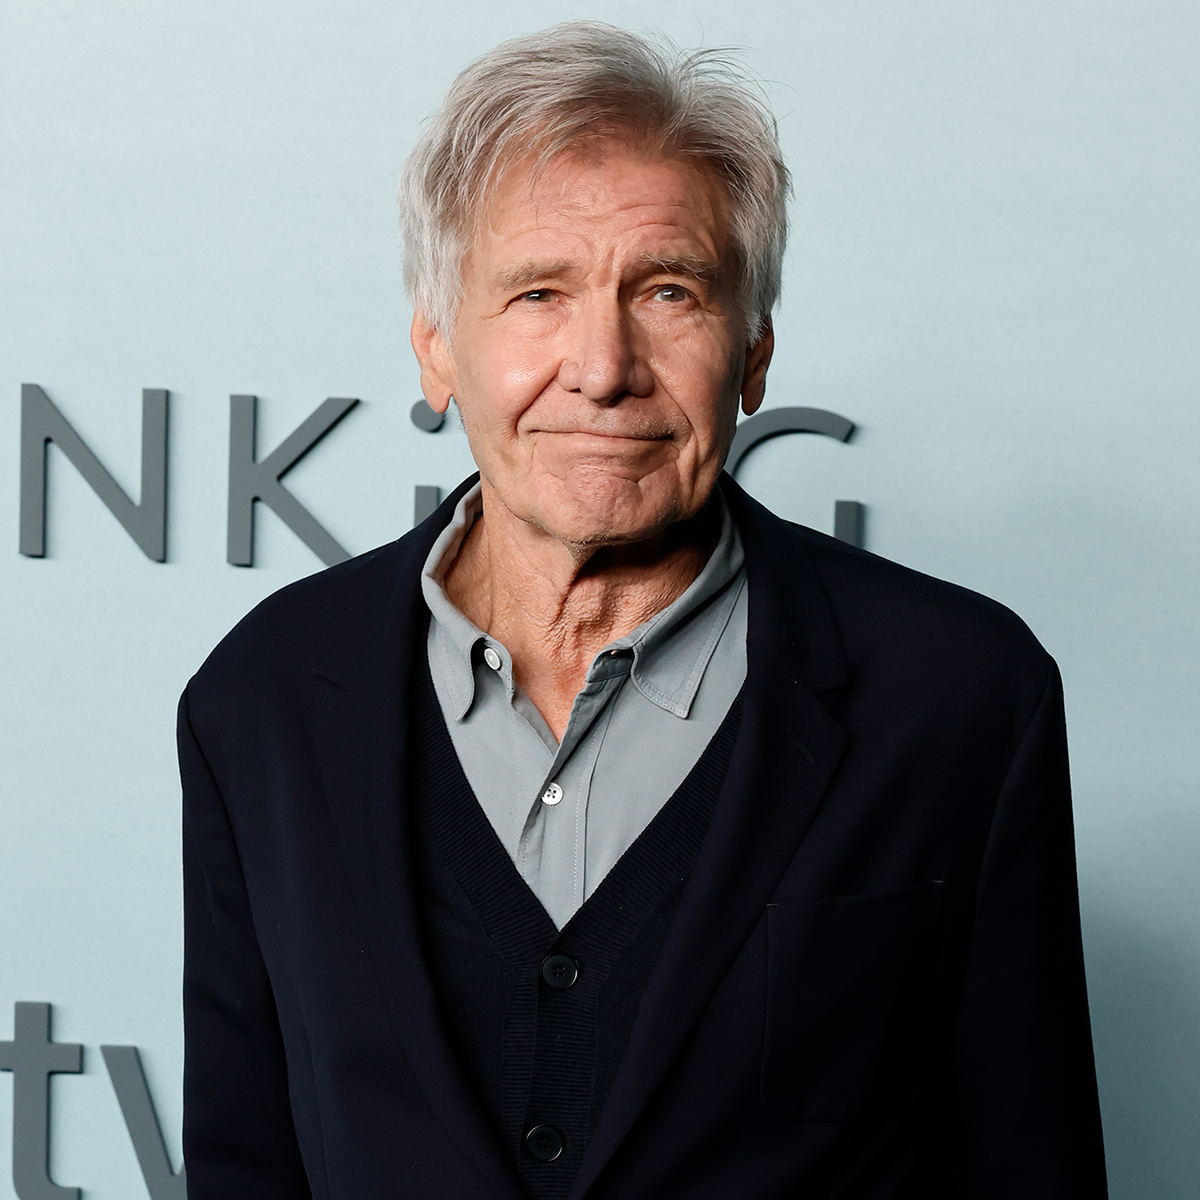 Finally, You Can Watch Harrison Ford Sing Sugar Ray’s “Every Morning” in Shrinking Sneak Peek – E! Online